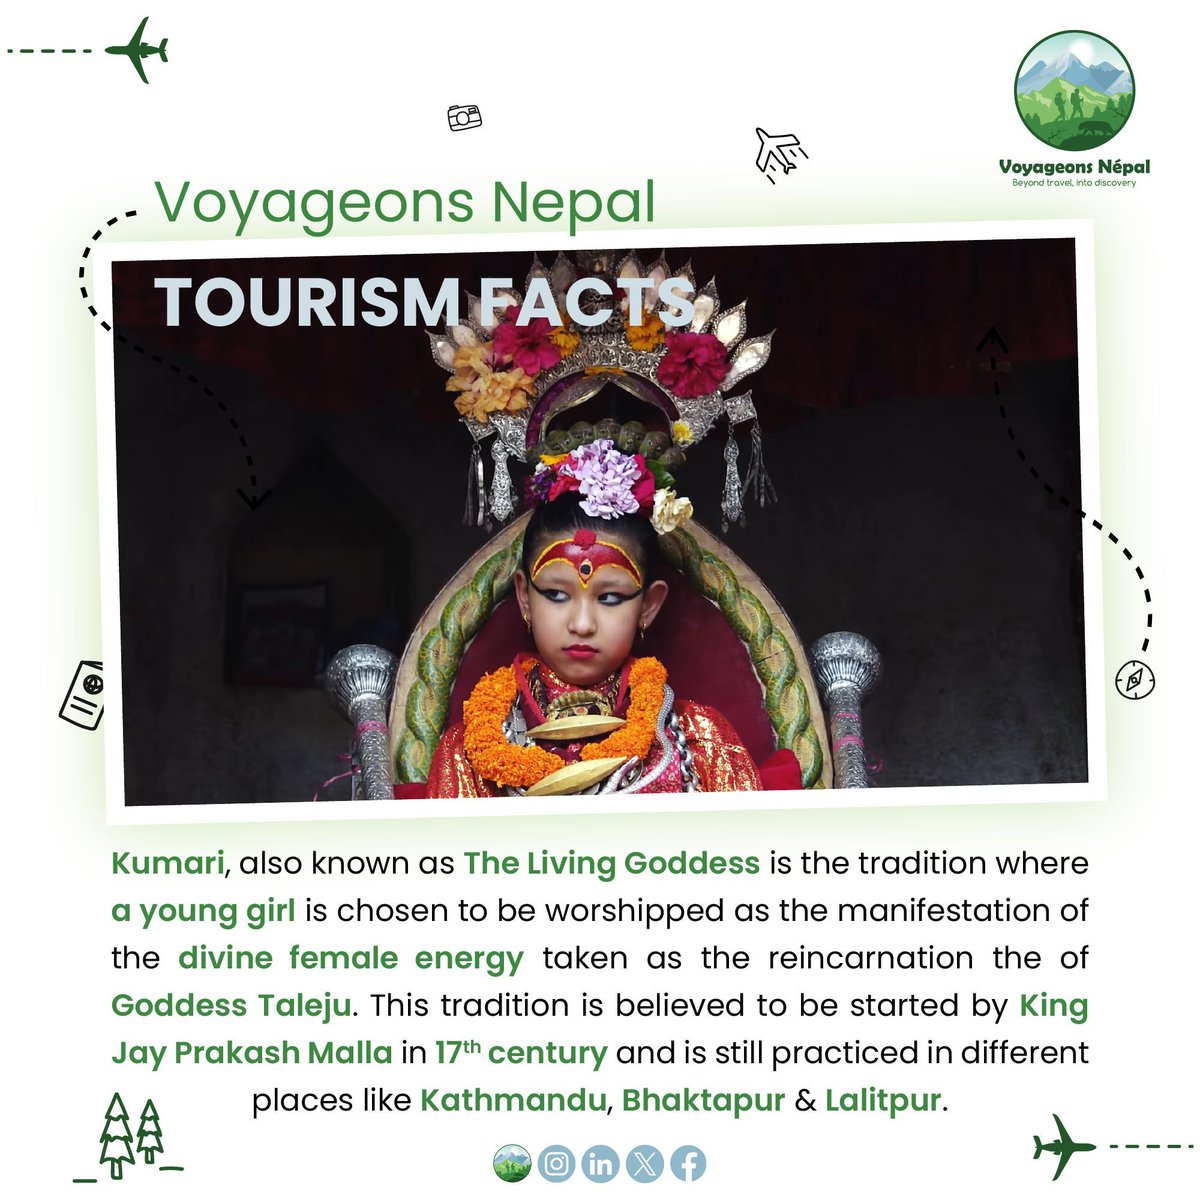 Do you know? Nepal's tourism scene is soaring to new heights! 

Come, and be a part of Nepal's incredible tourism evolution! 

#DiscoverNepal #TravelFacts #Lumbini #VoyageonsNepal #ImmersiveTravel #PassiveIncome